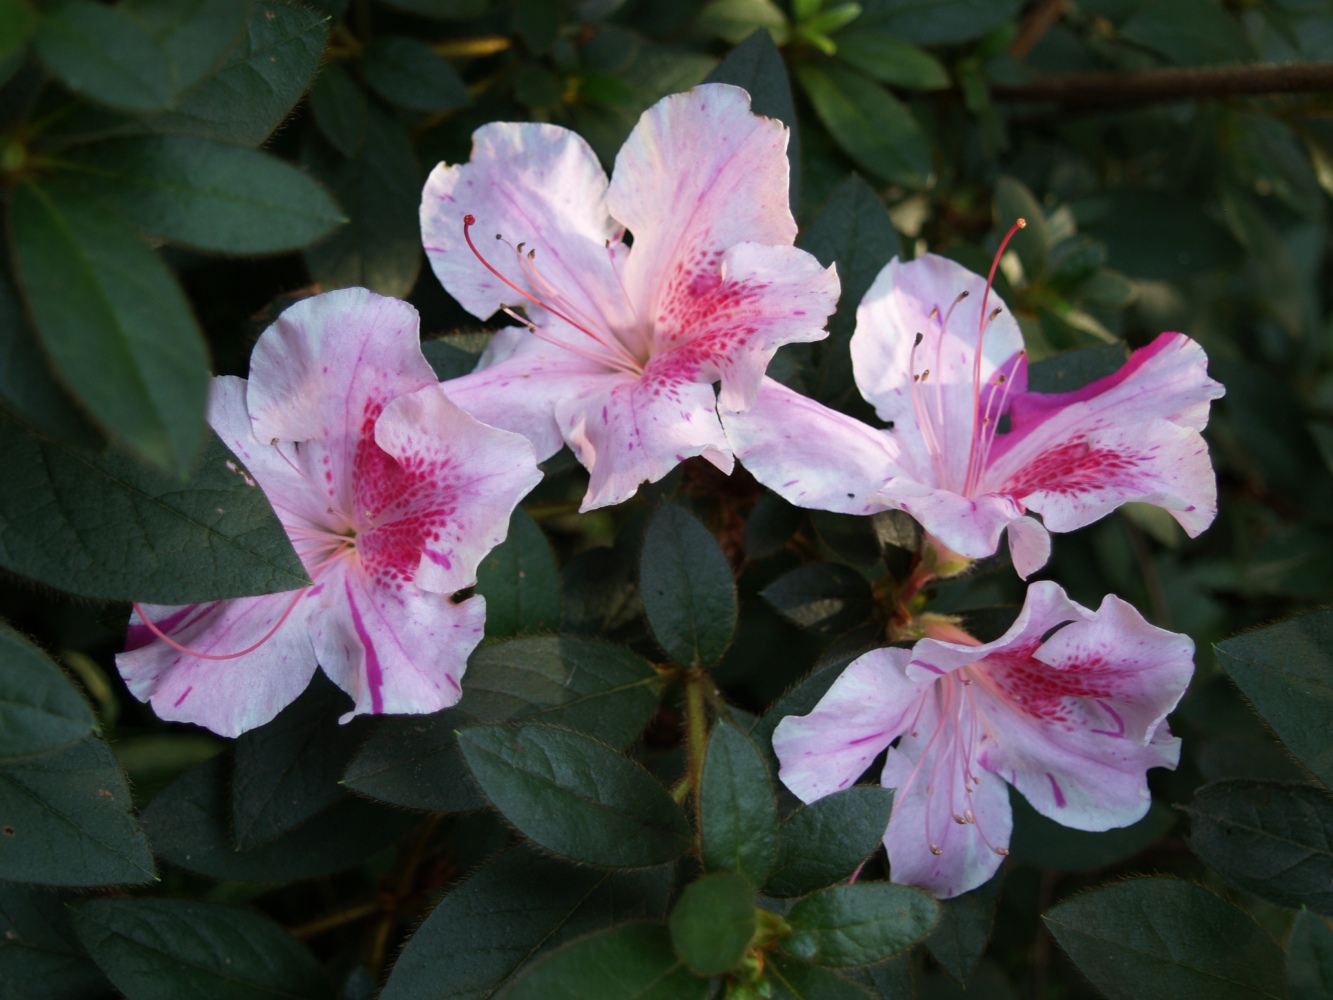 Autumn Twist Encore azalea is the most dependable rebloomer in this Virginia garden. It often begins to flower in late August, with blooms extending through September.